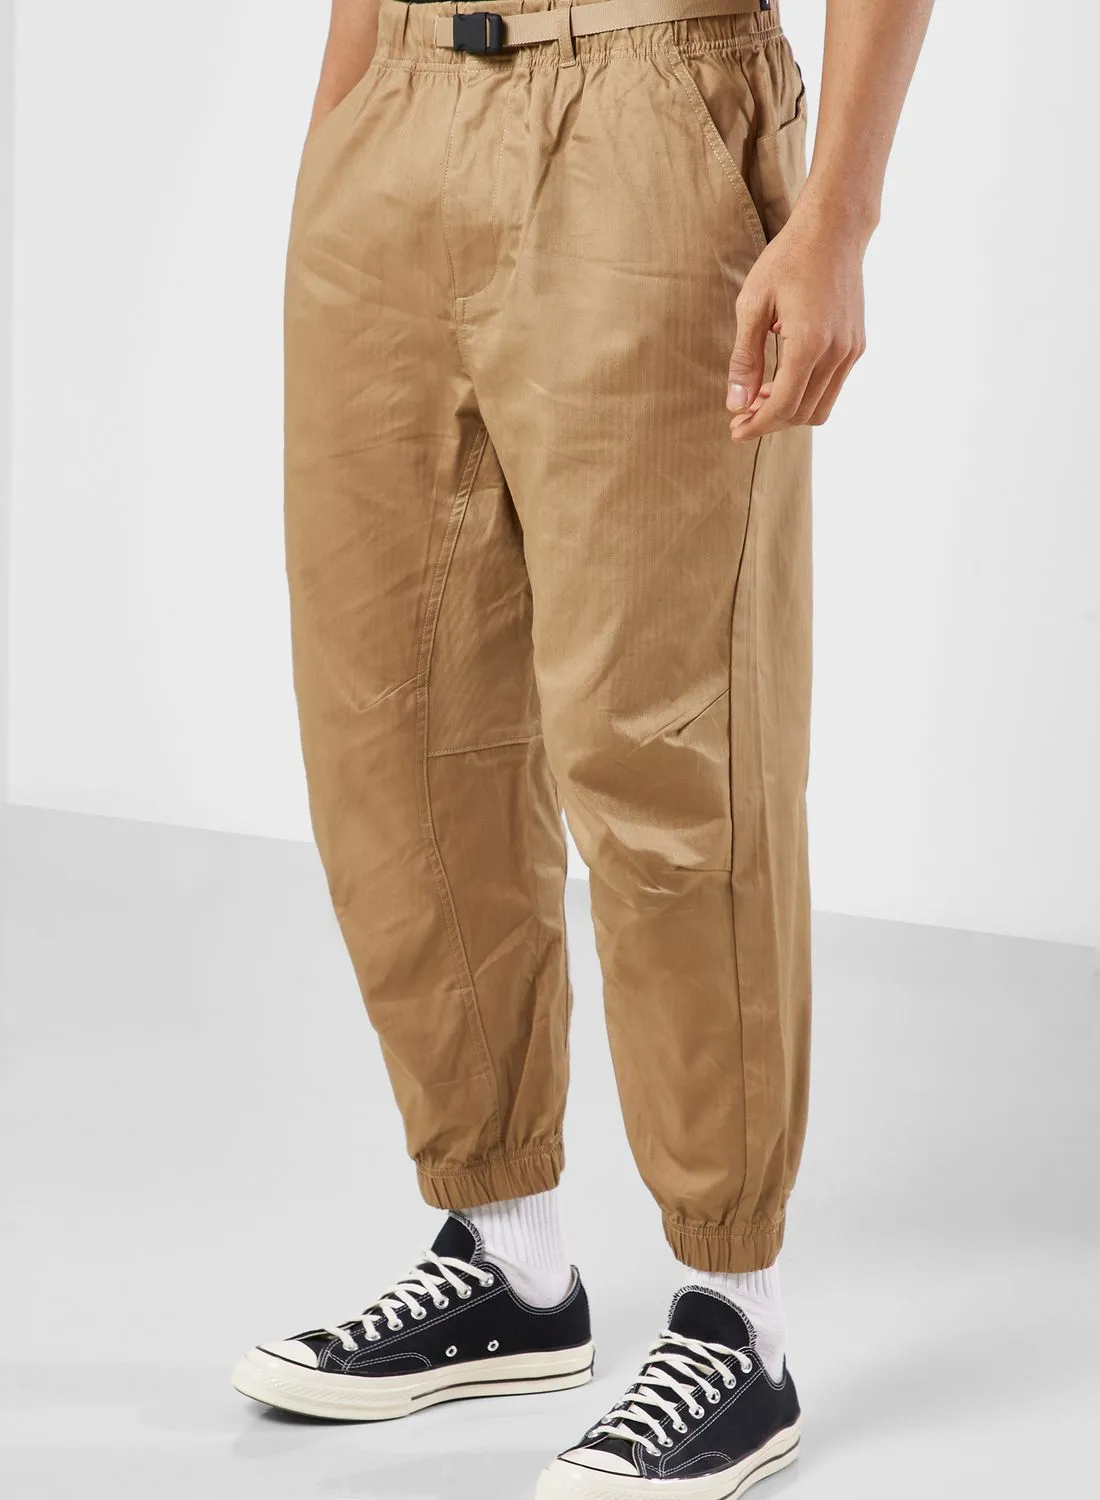 CONVERSE Elevated Woven Sweatpants